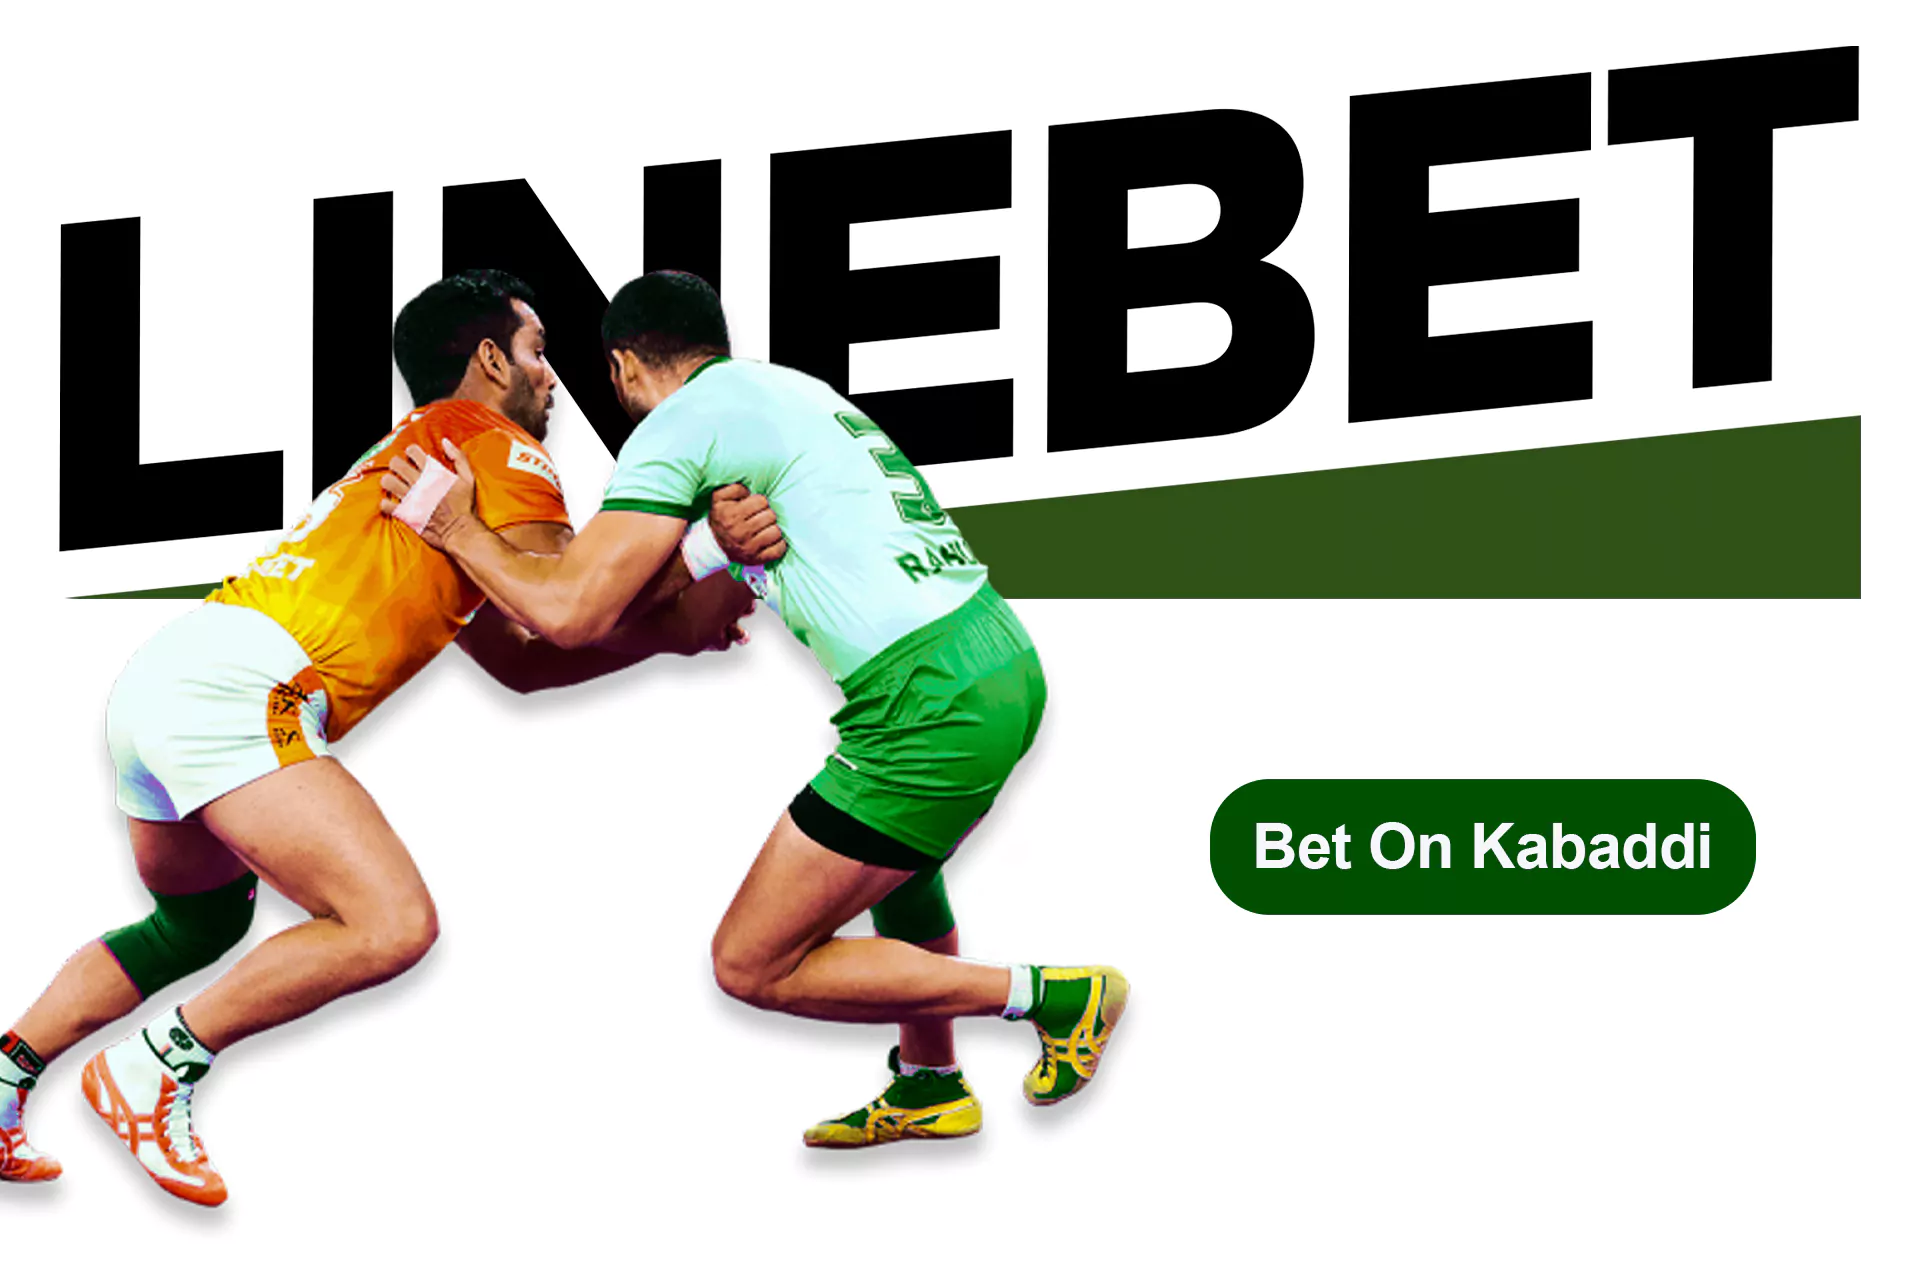 Kabaddi is available for betting in the sportsbook.